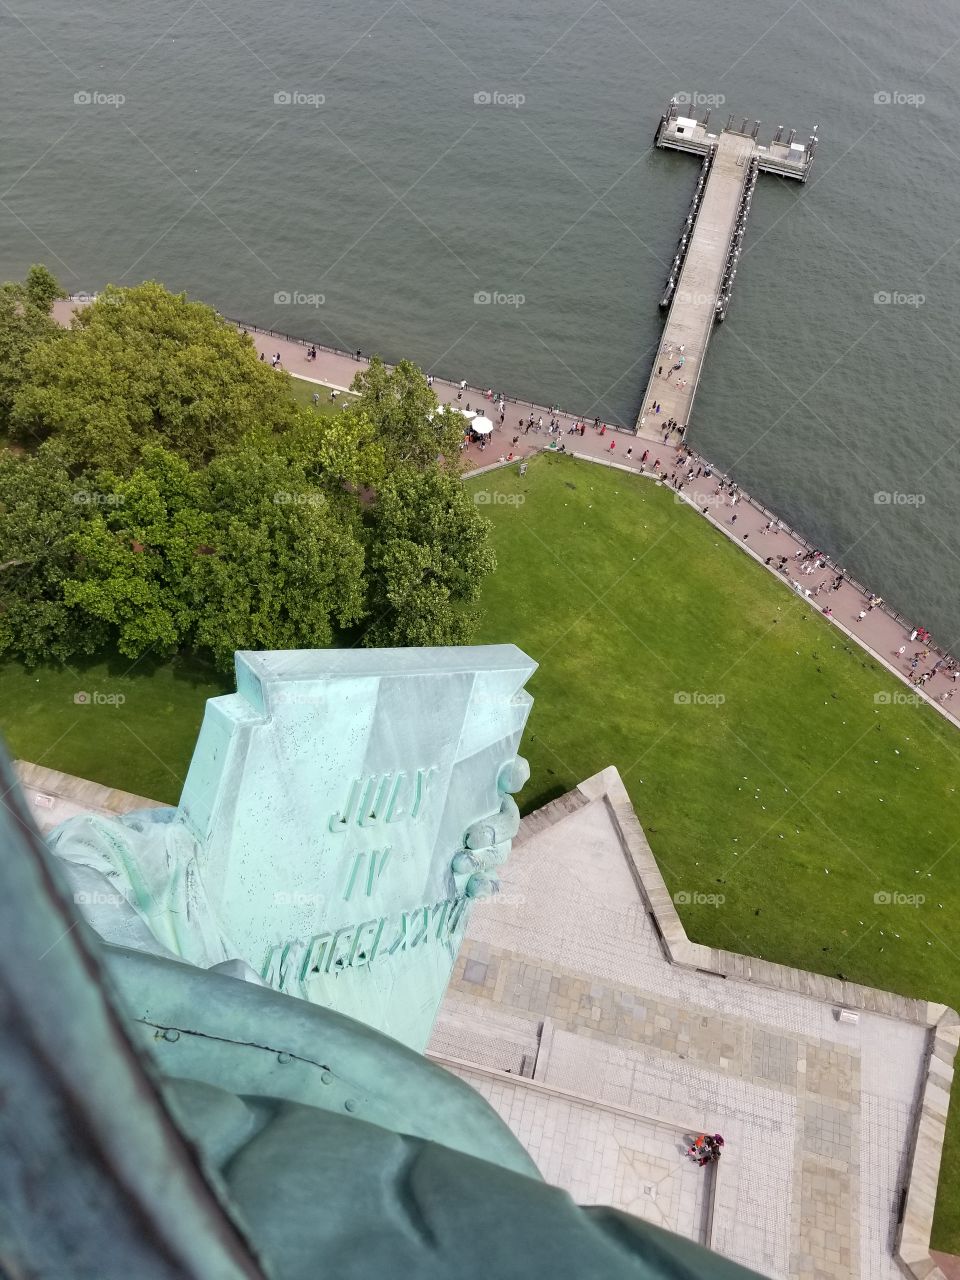 Statue of Liberty's view